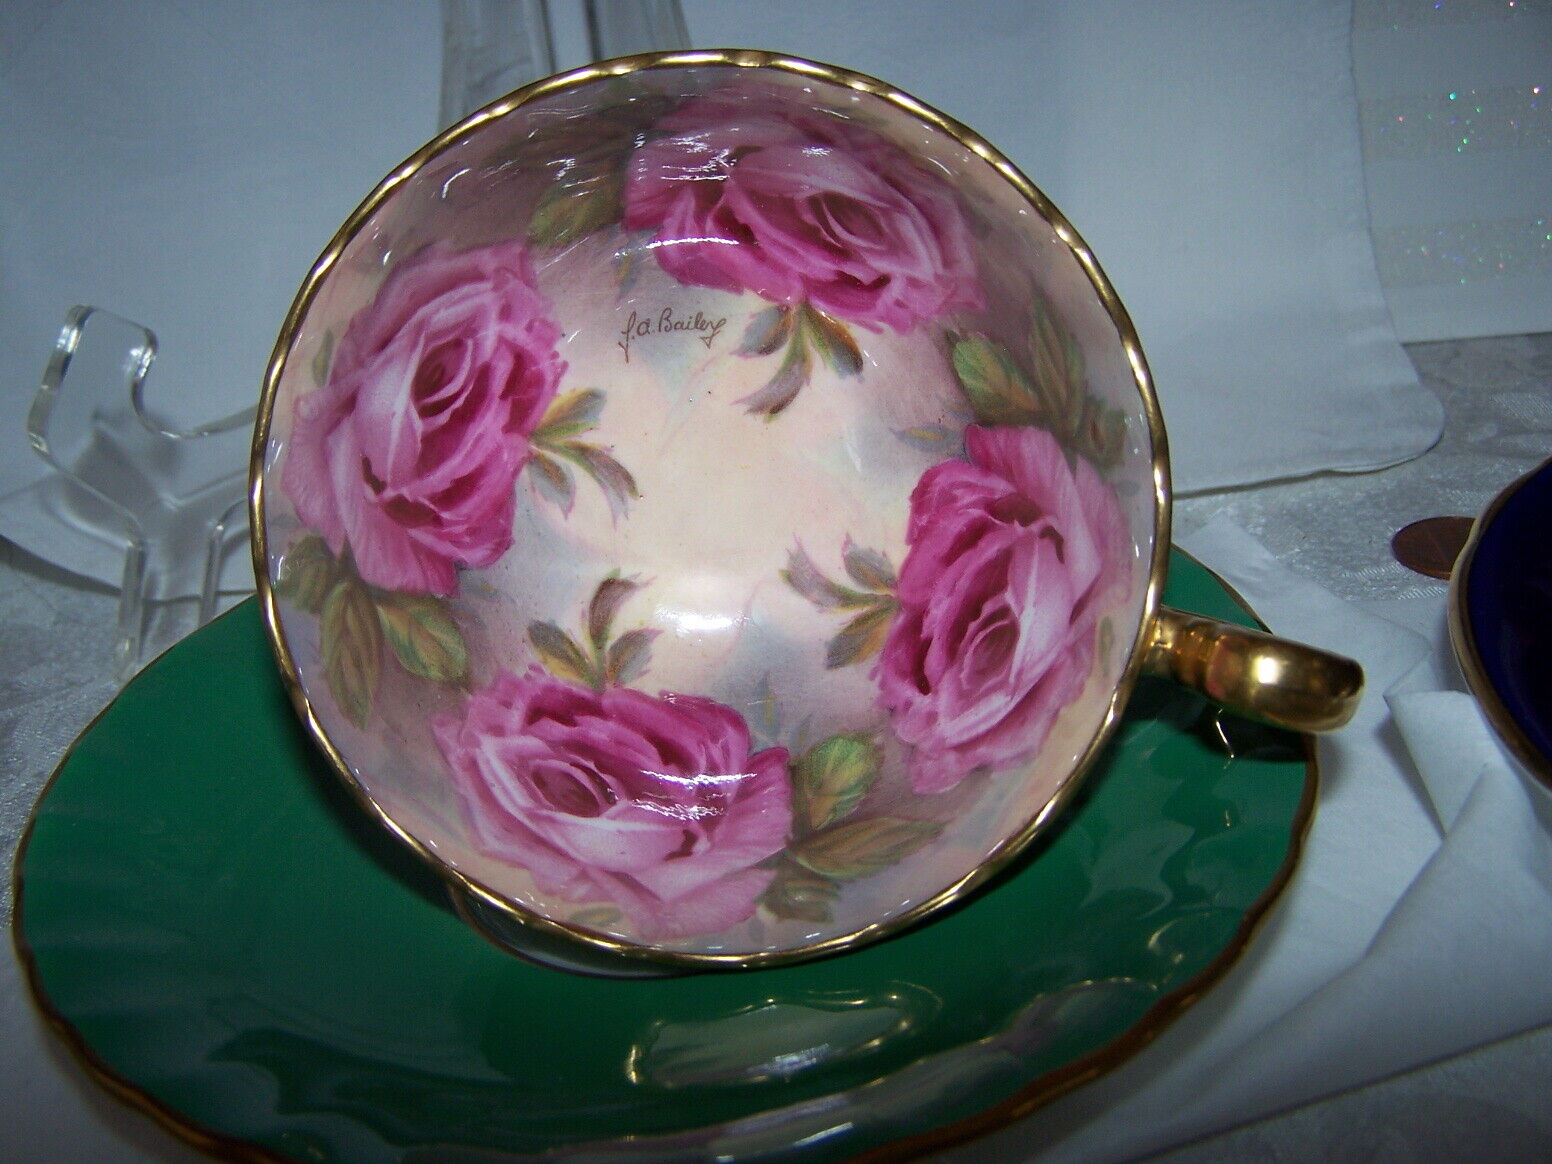 OFFERS!! RARE CUP SAUCER SIGNED BAILEY 4 ROSES  HANDPAINTED AYNSLEY  England ++  Paragon